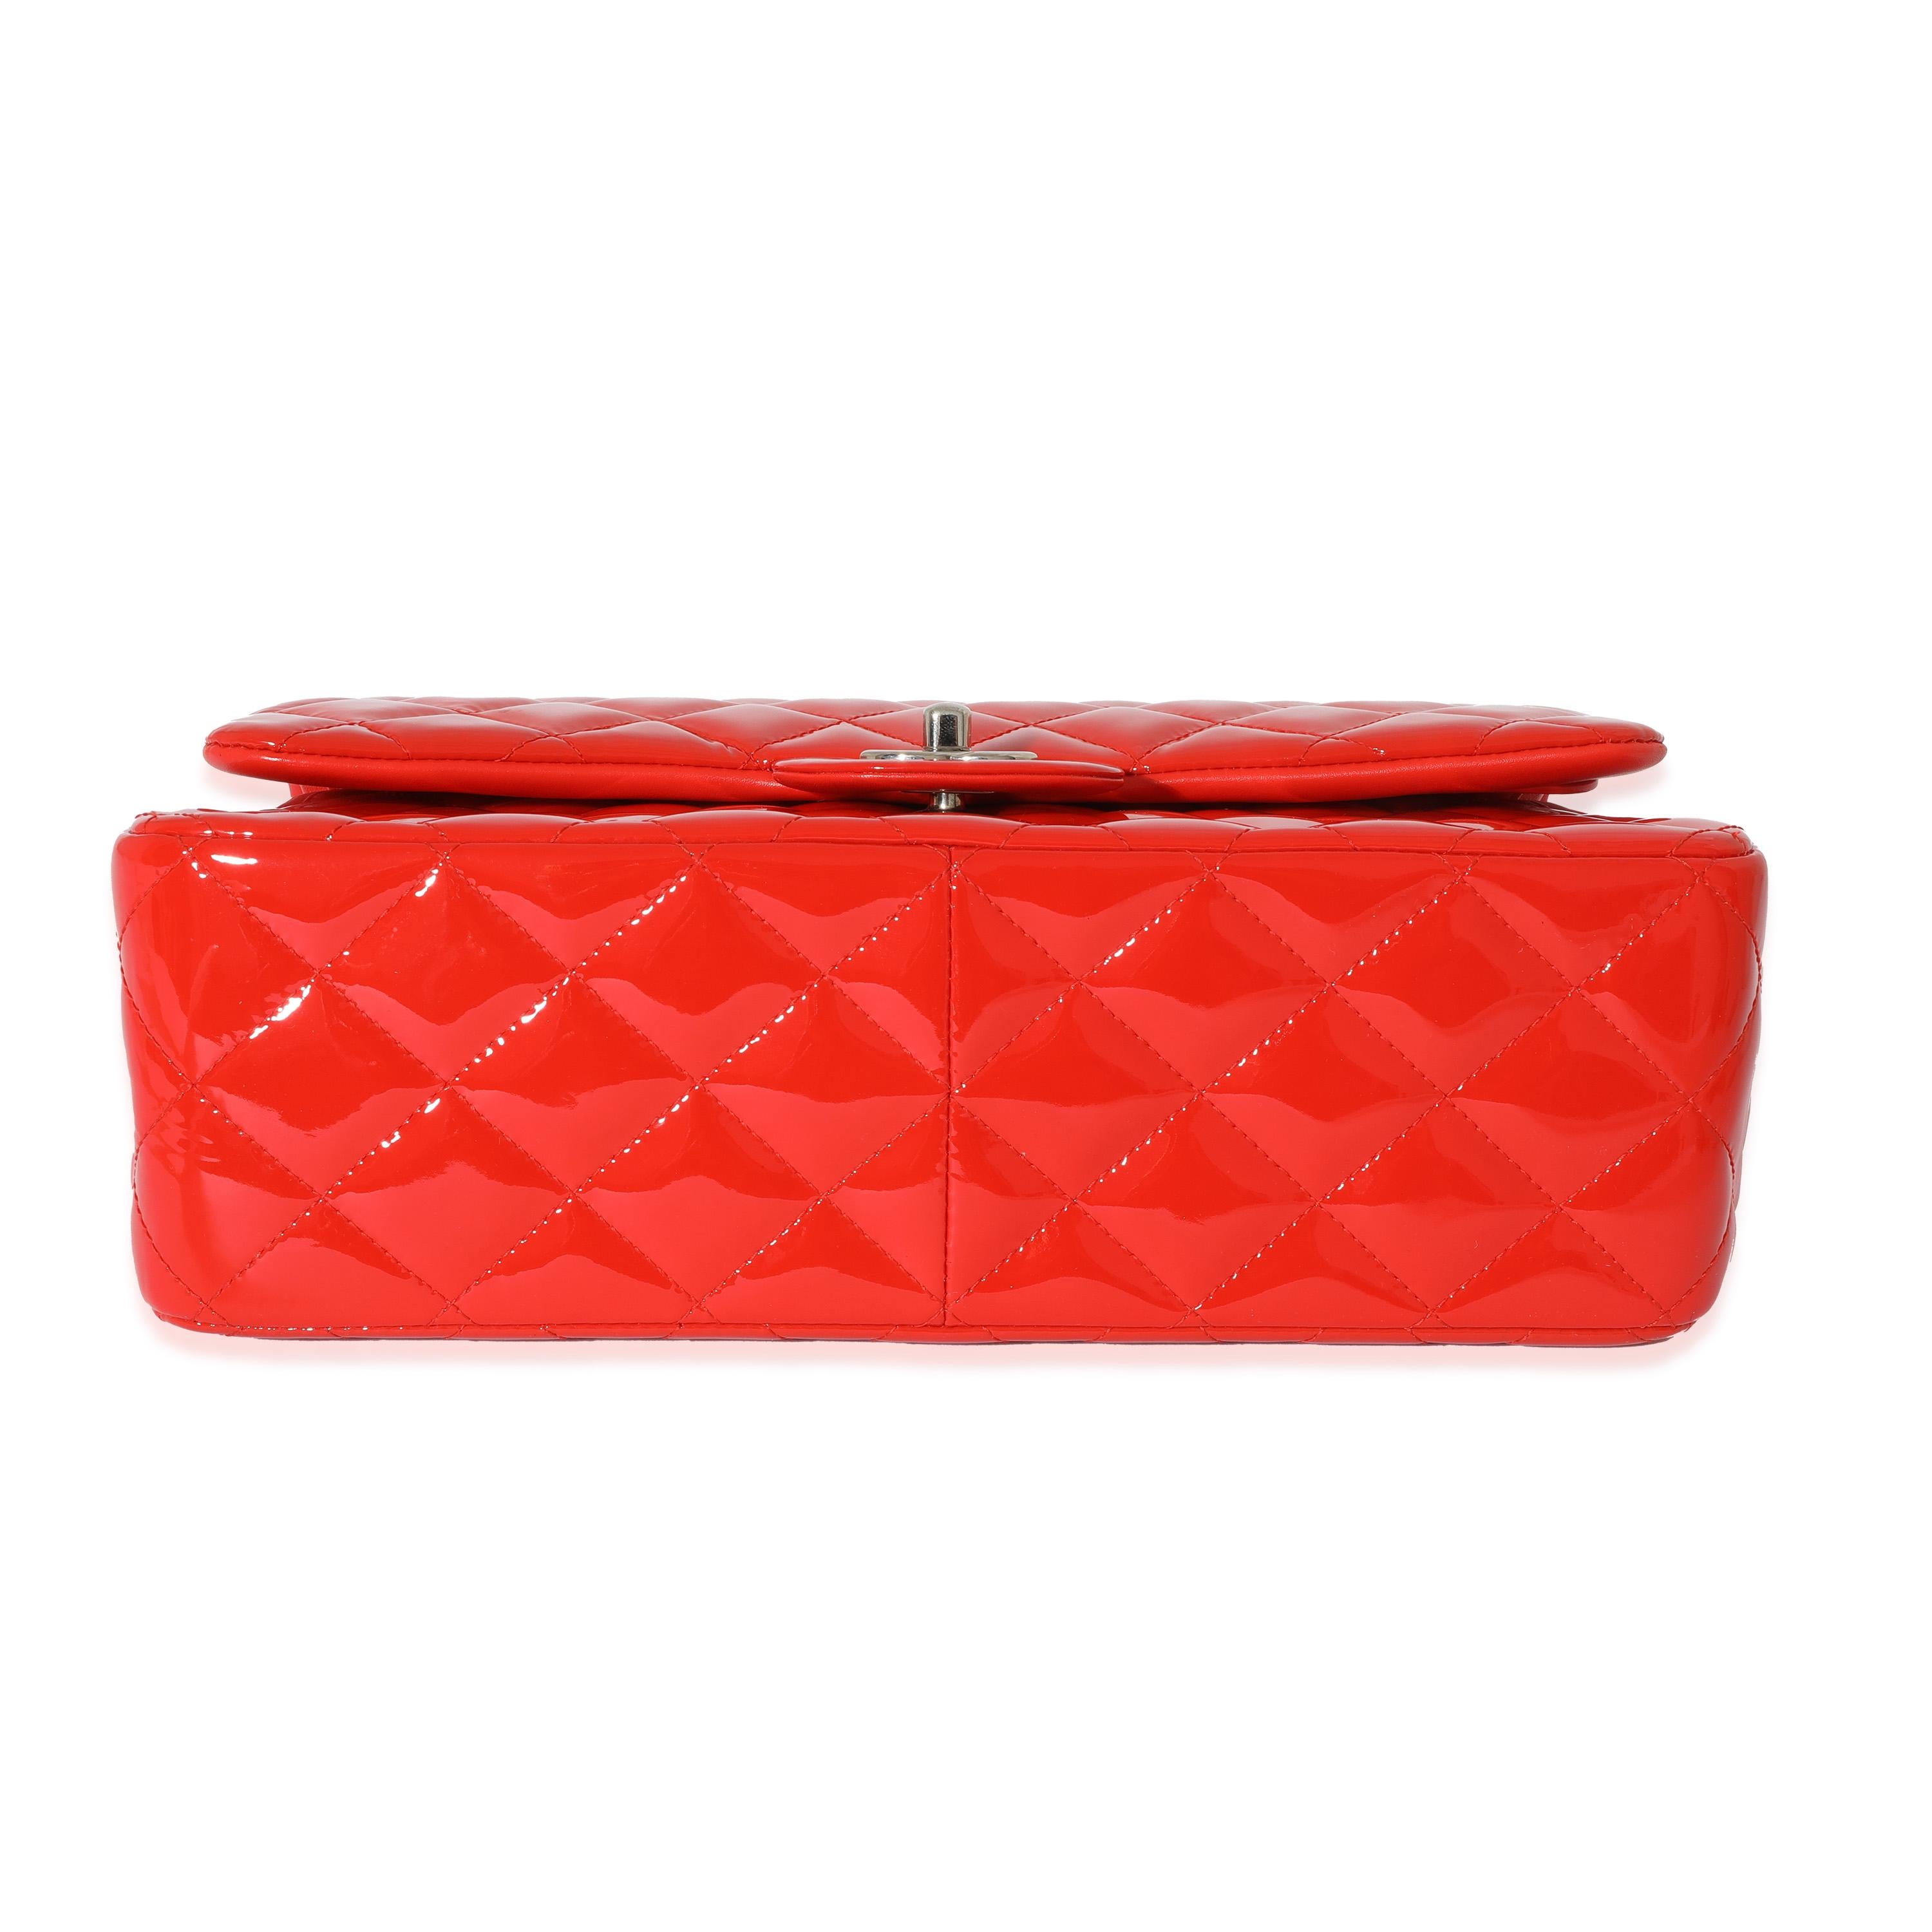 Chanel Orange Quilted Patent Leather Jumbo Double Flap Bag For Sale 2